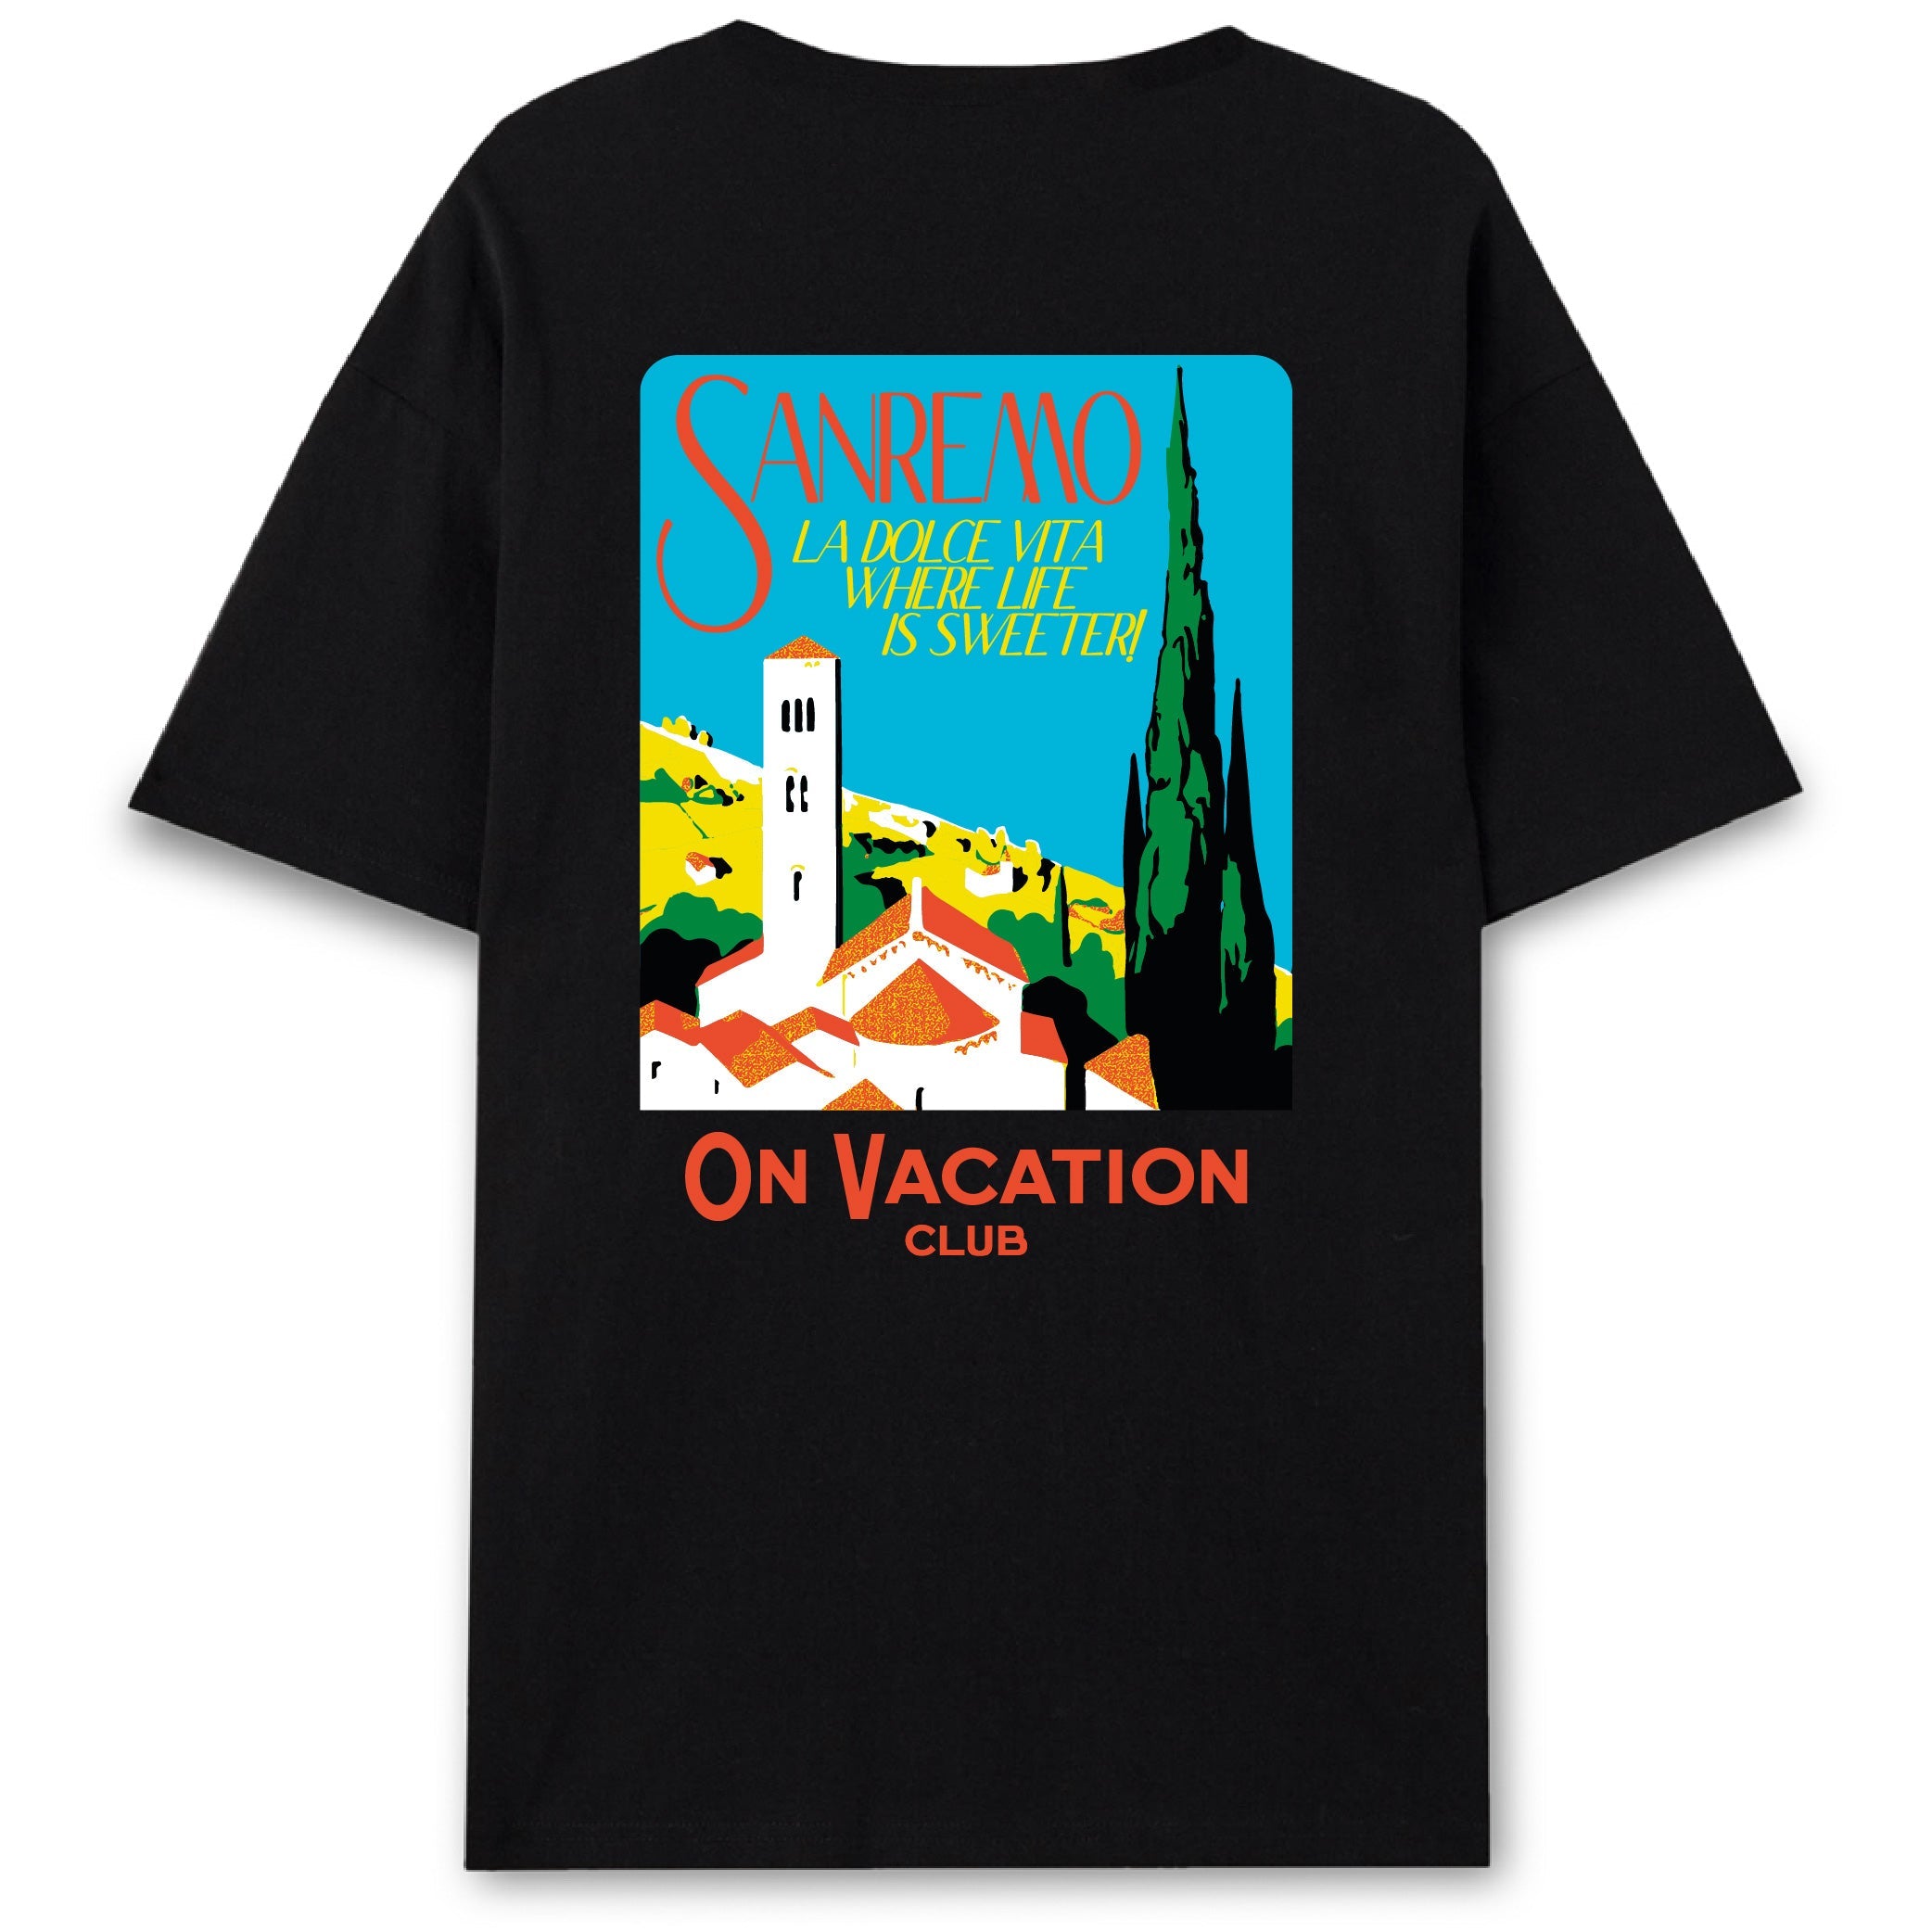 On Vacation Unisex T-Shirt "Let's Grow Together" - Light Blue